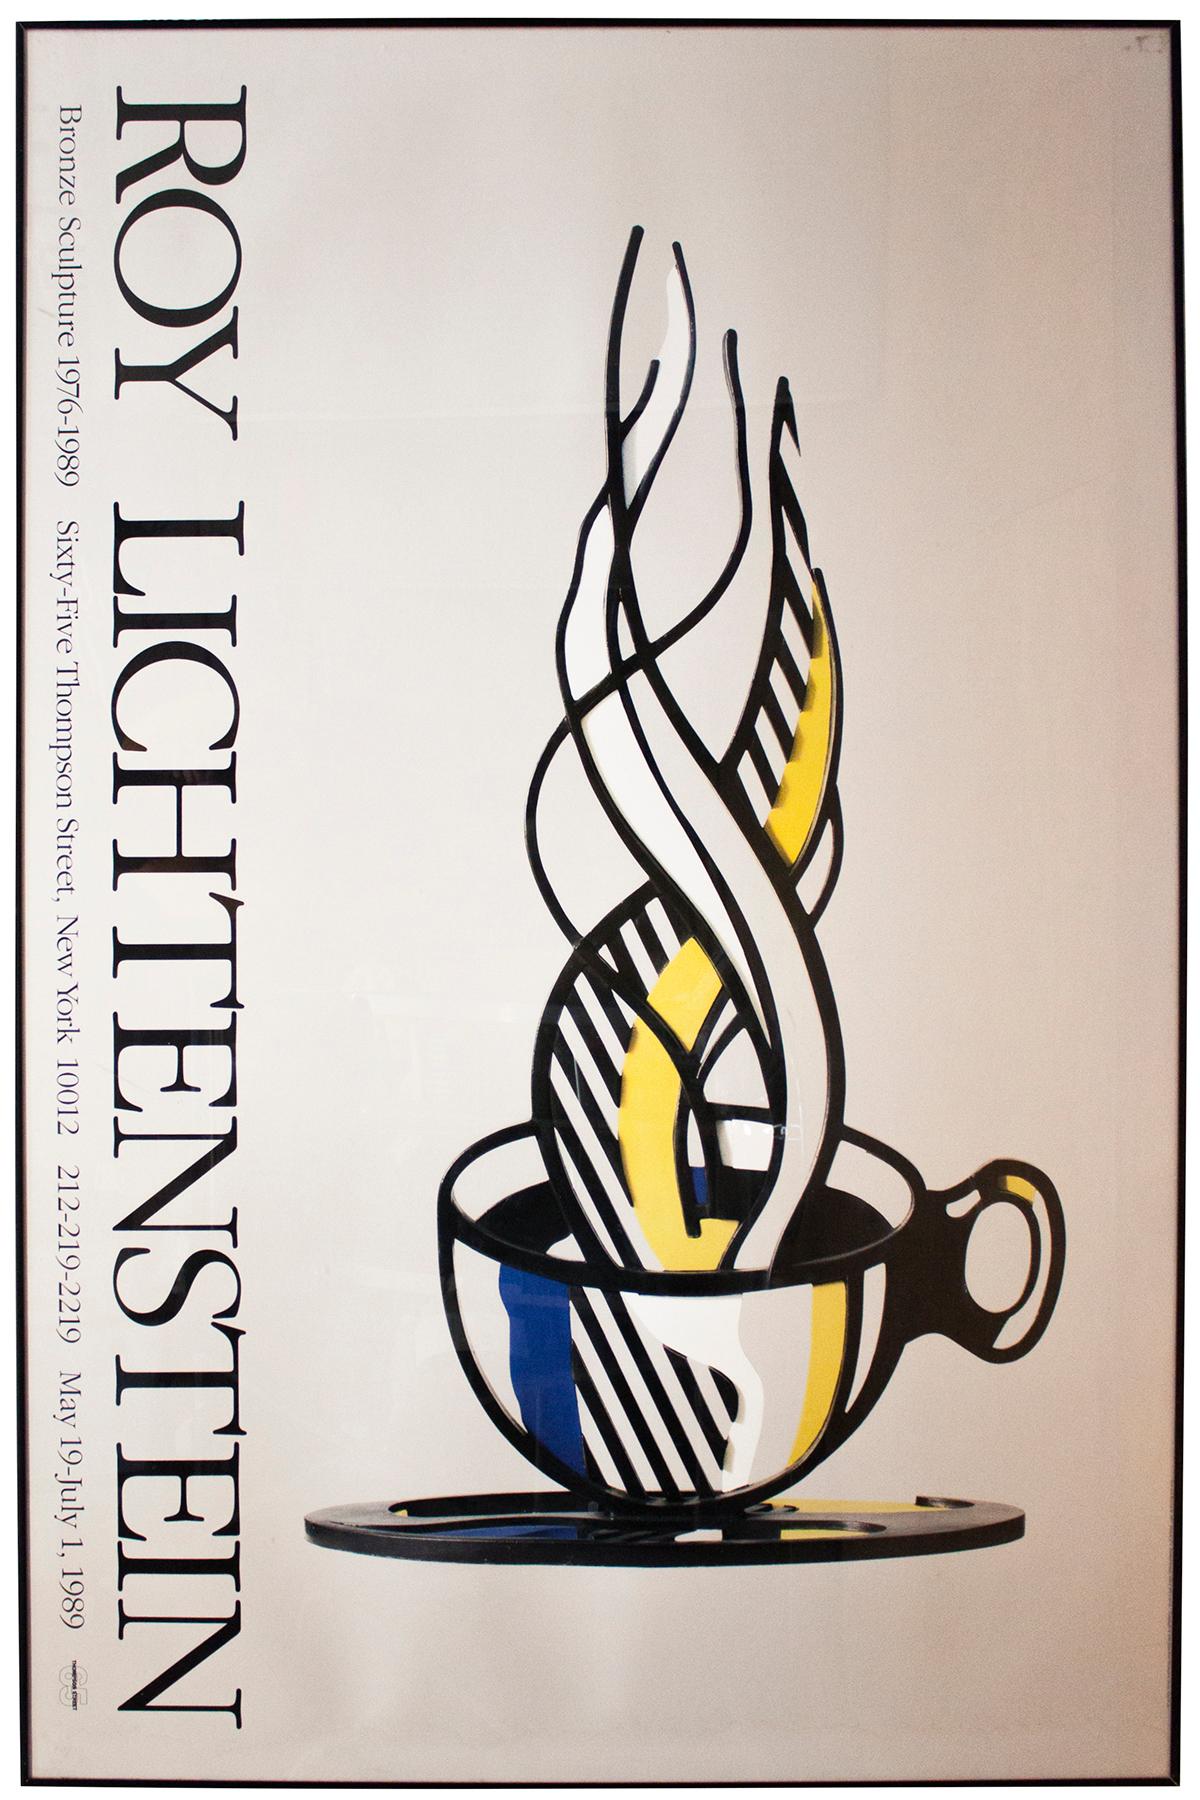 1989 exhibition poster for an exhibit of Lichtenstein's bronze sculptures held at 65 Thompson Street from May 19 to July 1. 1989. it is based on Lichtenstein's 1977 bronze sculpture, which was featured in the exhibit. 

The piece is in a black